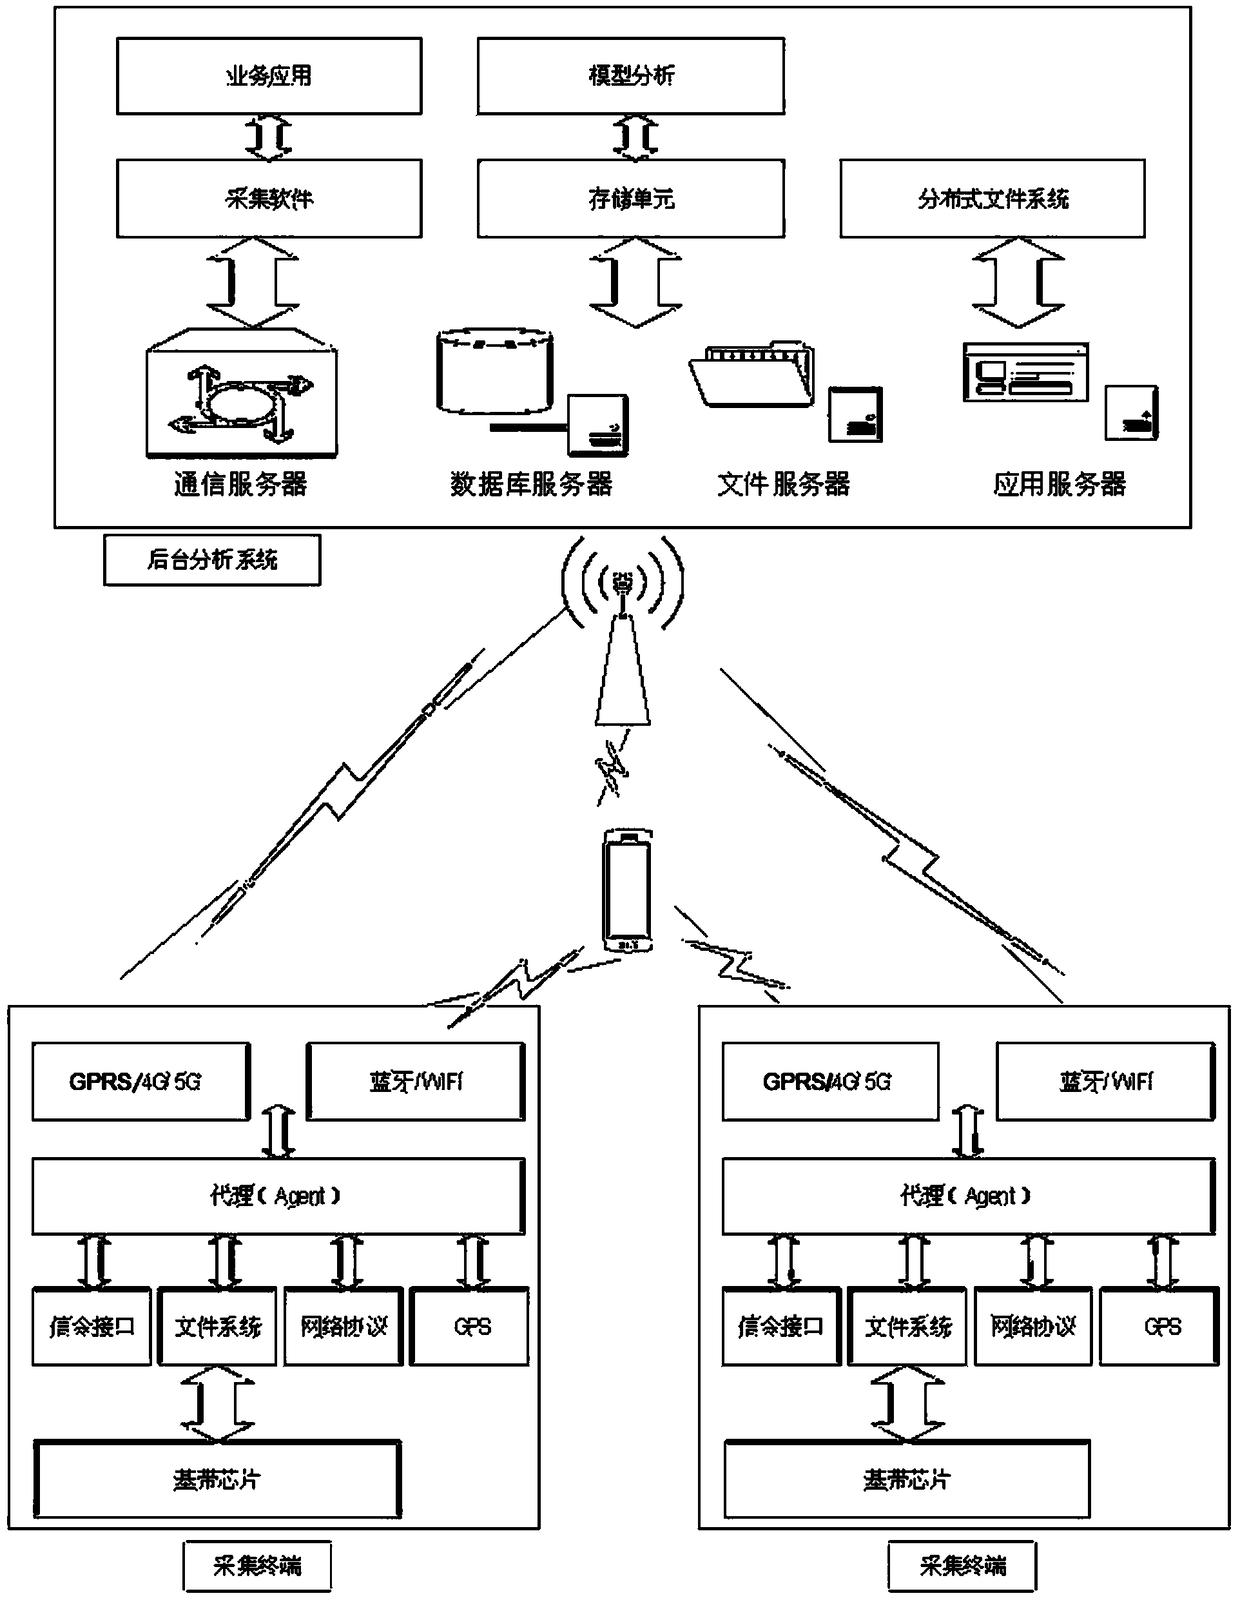 Network optimization system for collecting signalling based on terminal baseband chip